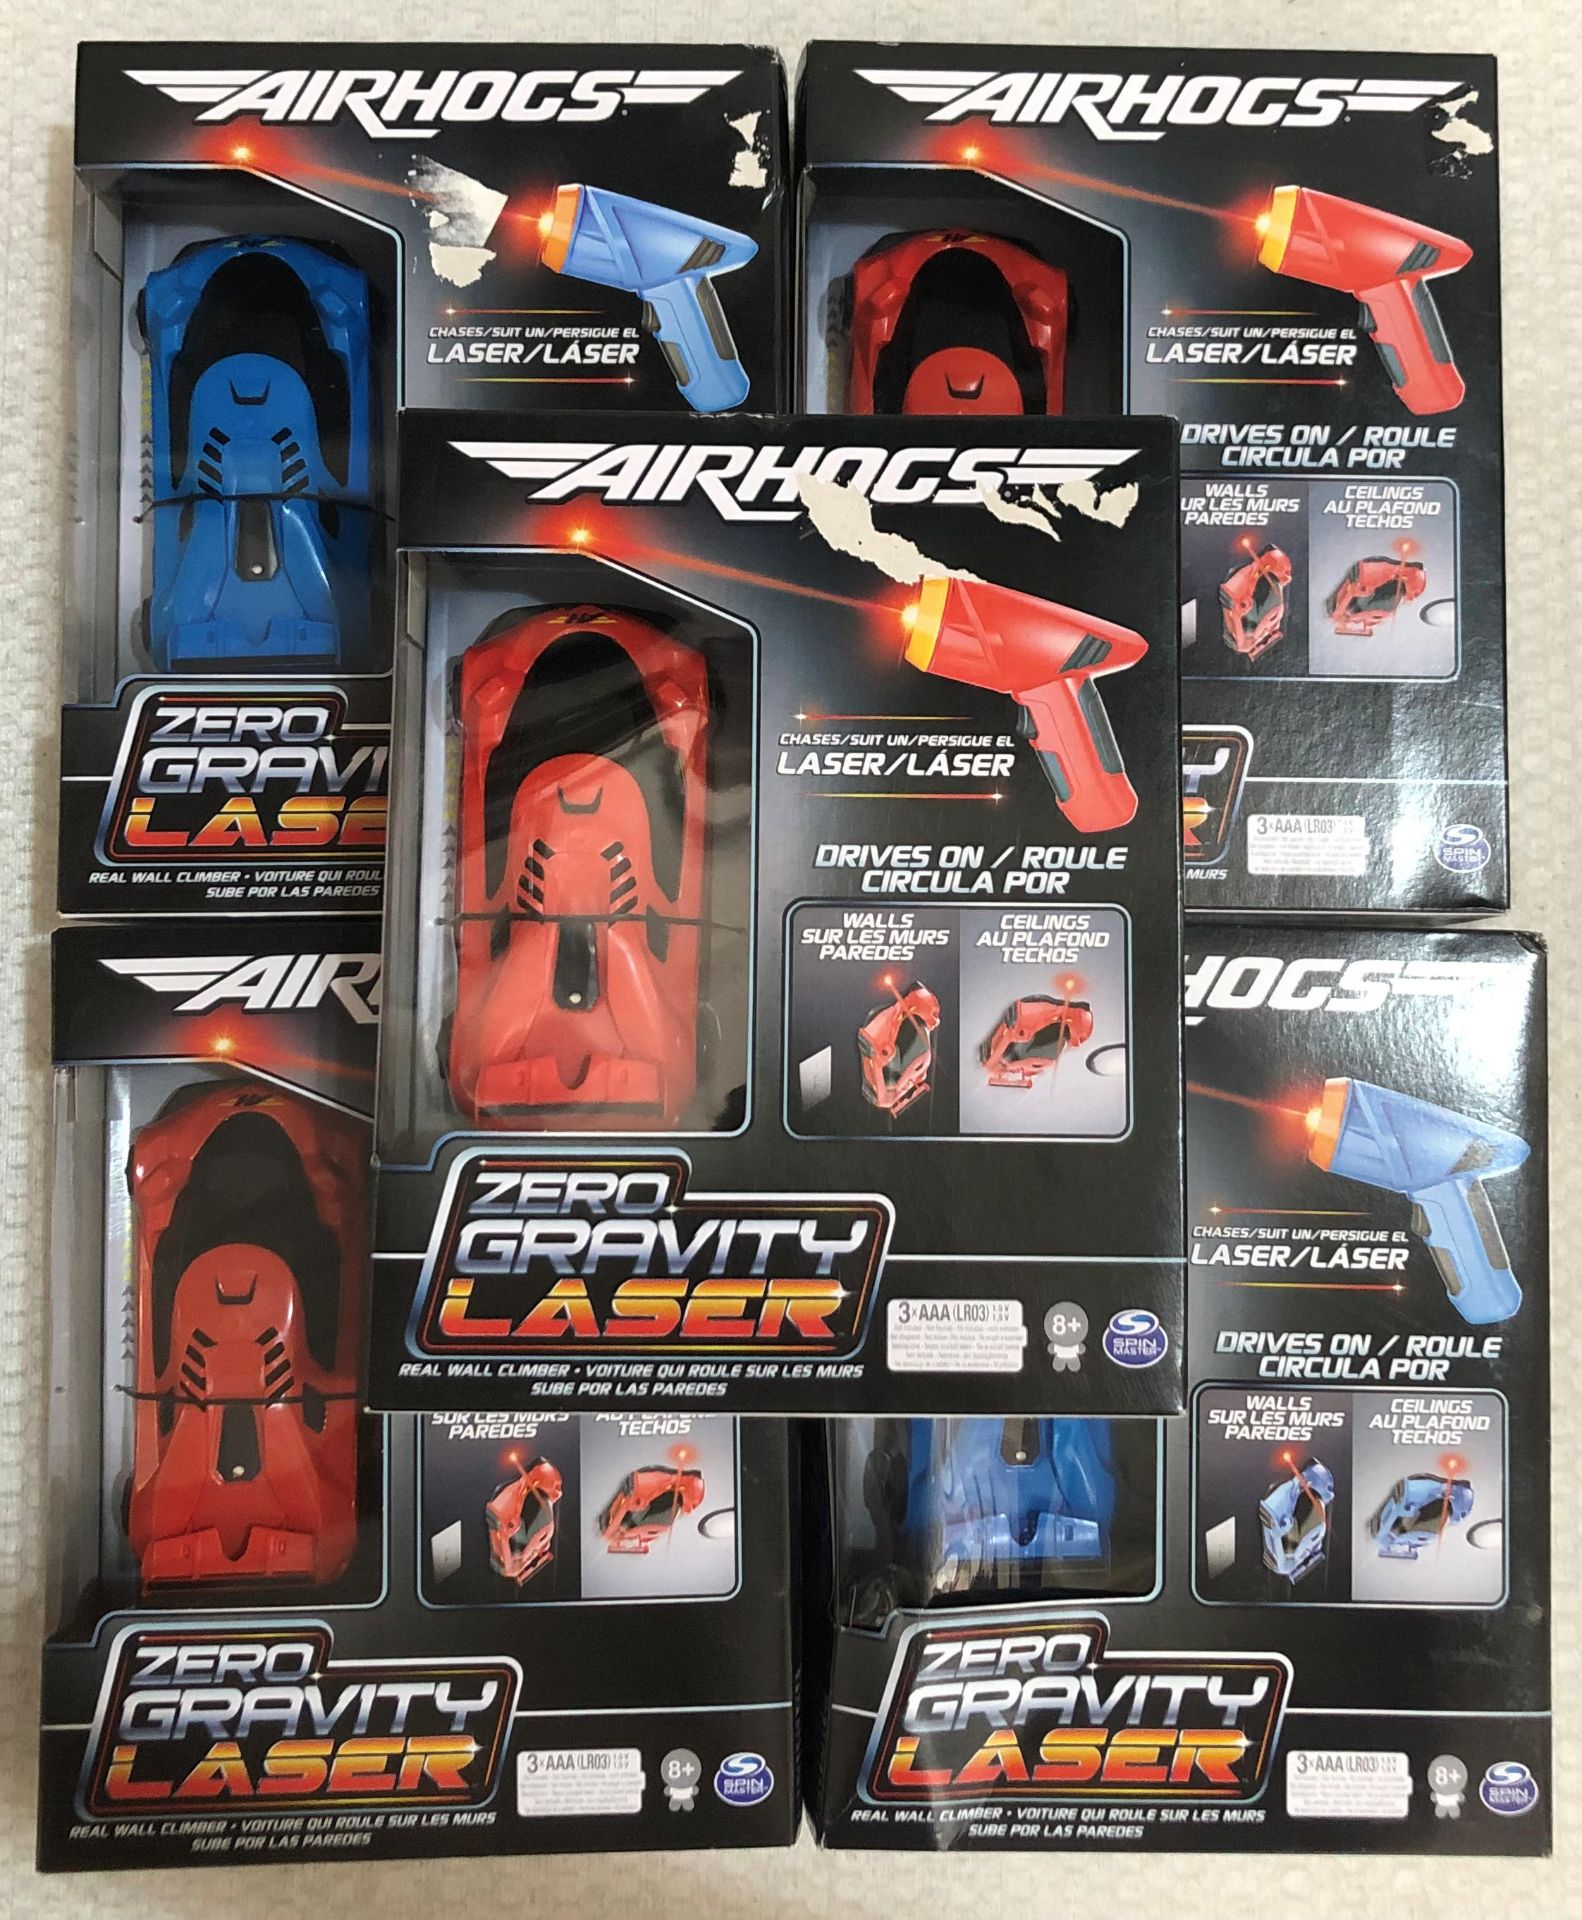 5 x Airhogs Zero Gravity Laser Wall Climbing Car - New/Boxed - HTYS328 - CL987 - Location: - Image 3 of 5